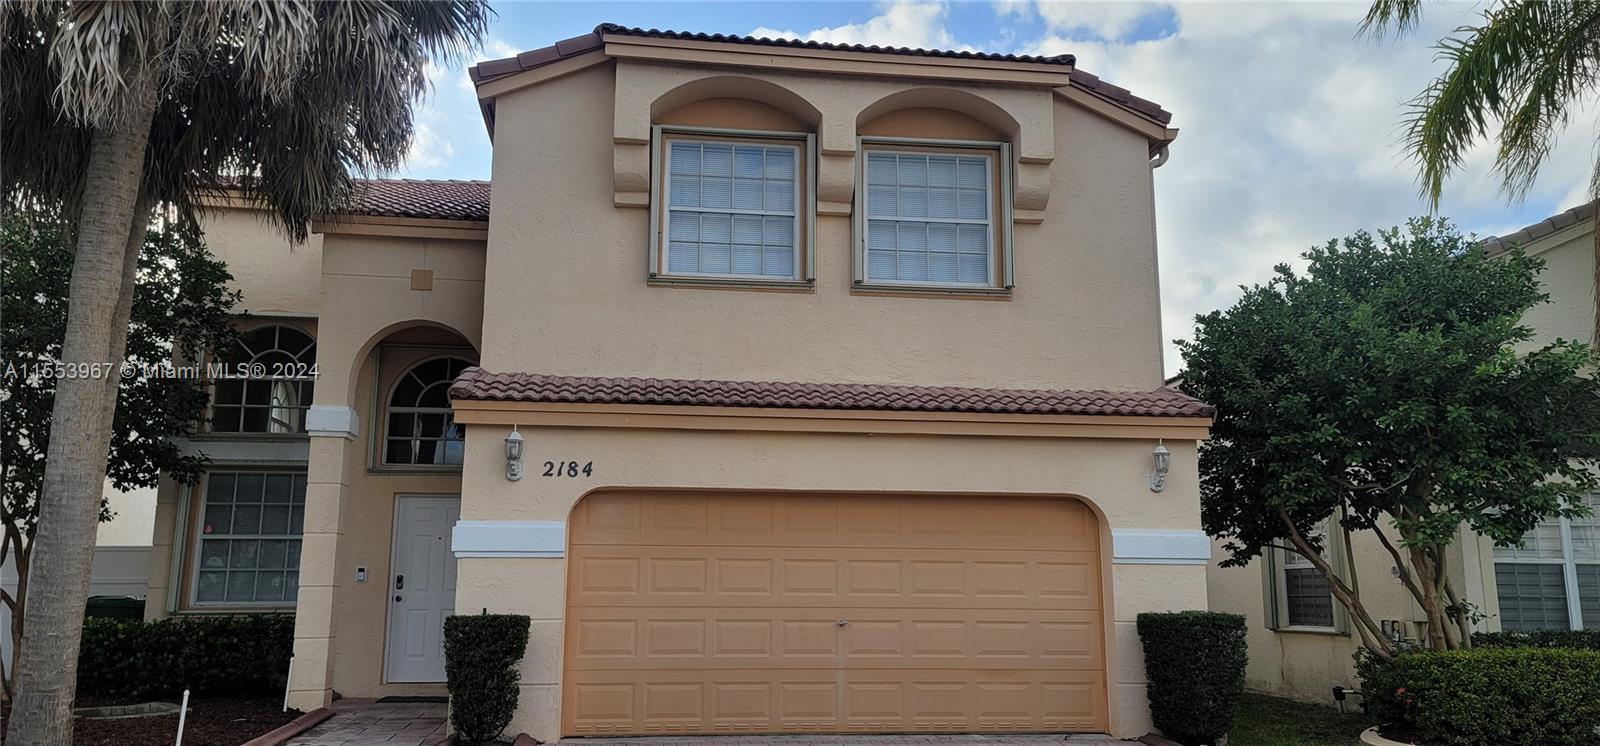 Photo of 2184 NW 157th Ave in Pembroke Pines, FL